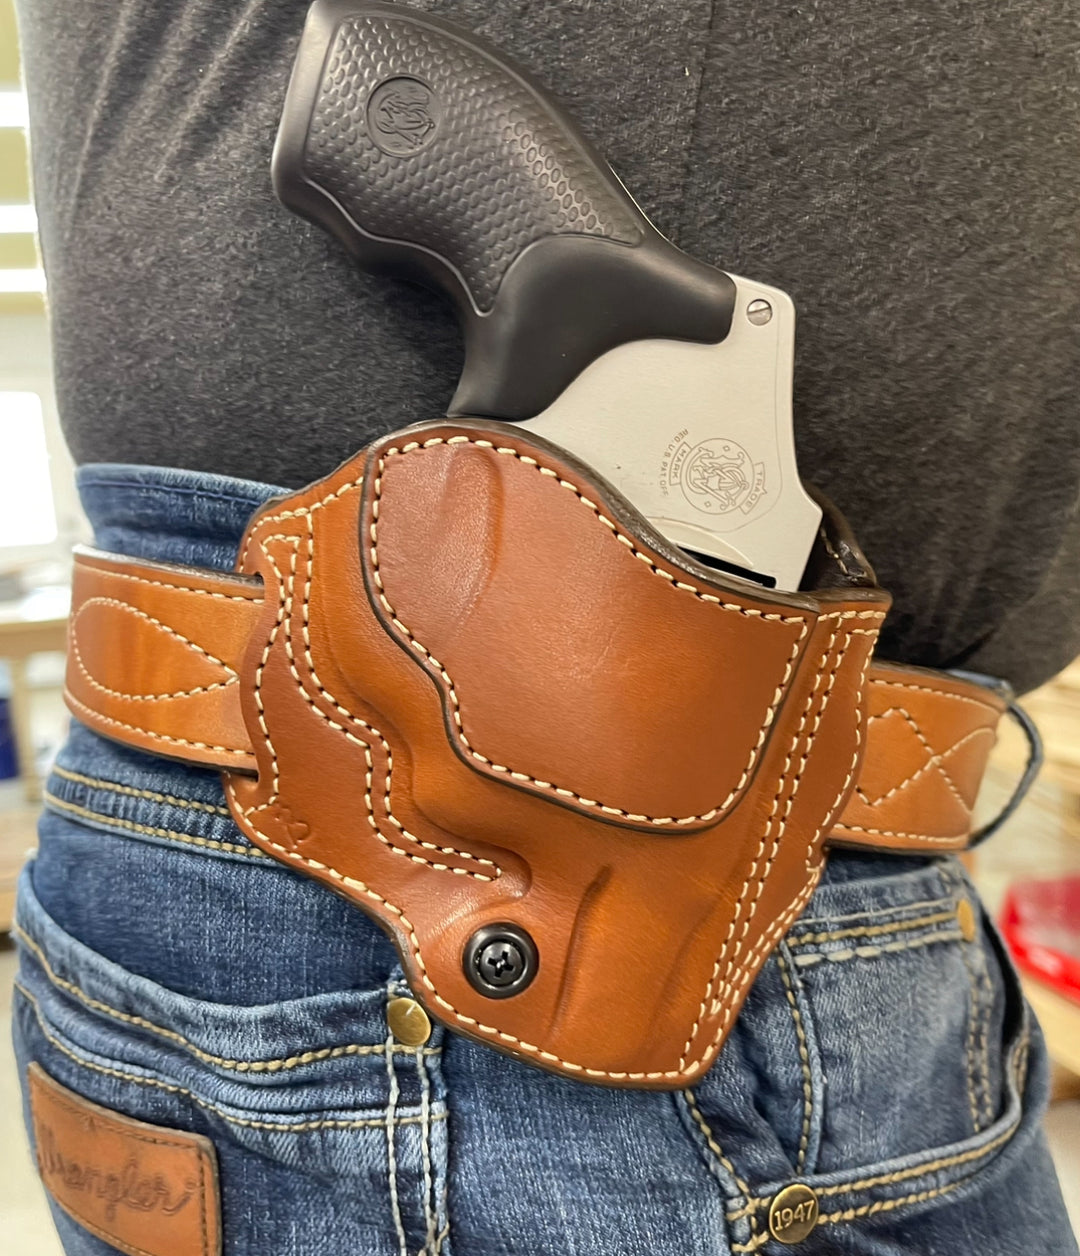 *Made to Order* LH/RH Ironside Holster Made for Your Gun